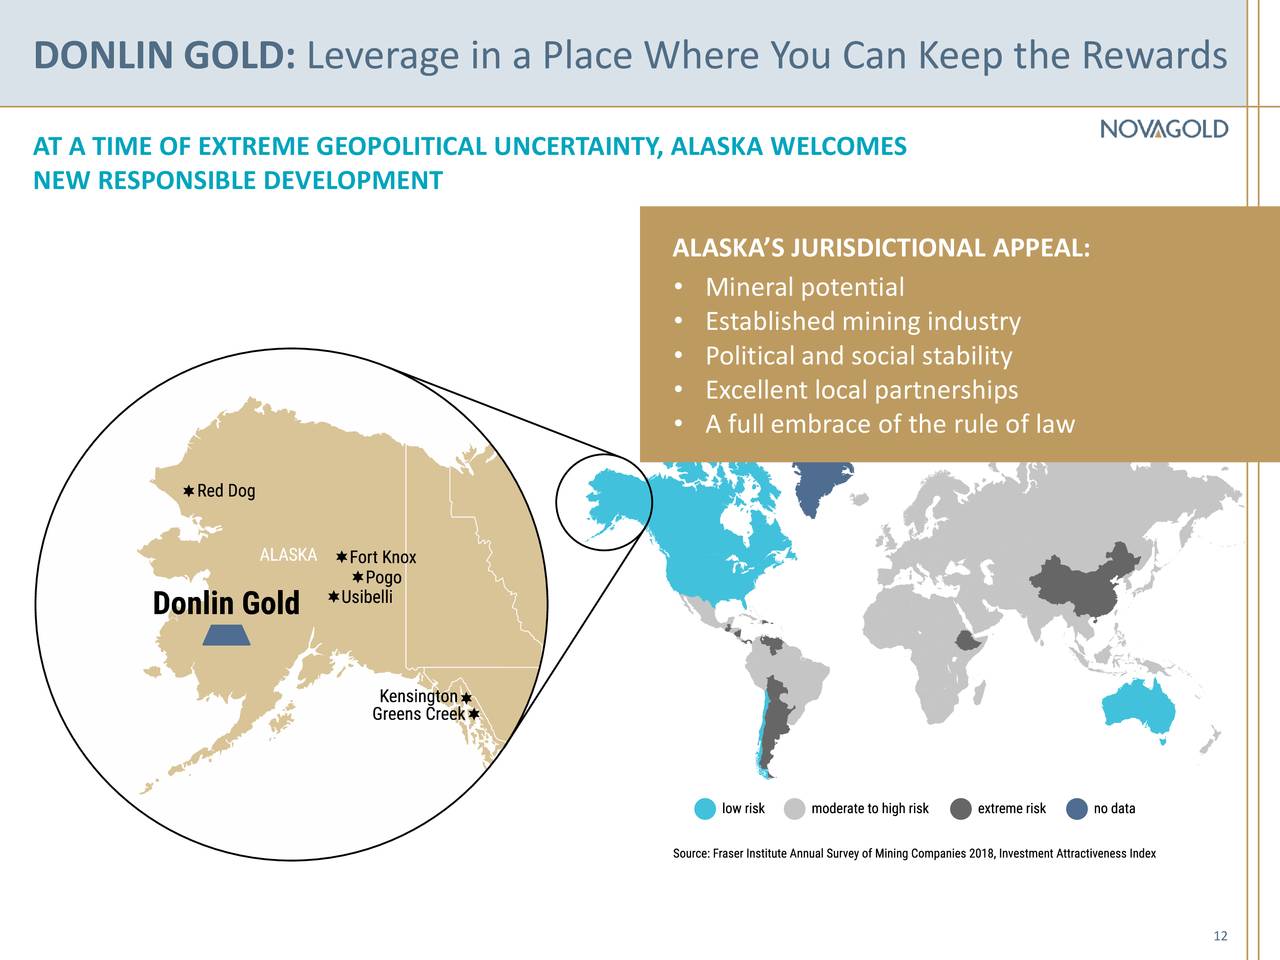 DONLIN GOLD: Leverage in a Place Where You Can Keep the Rewards